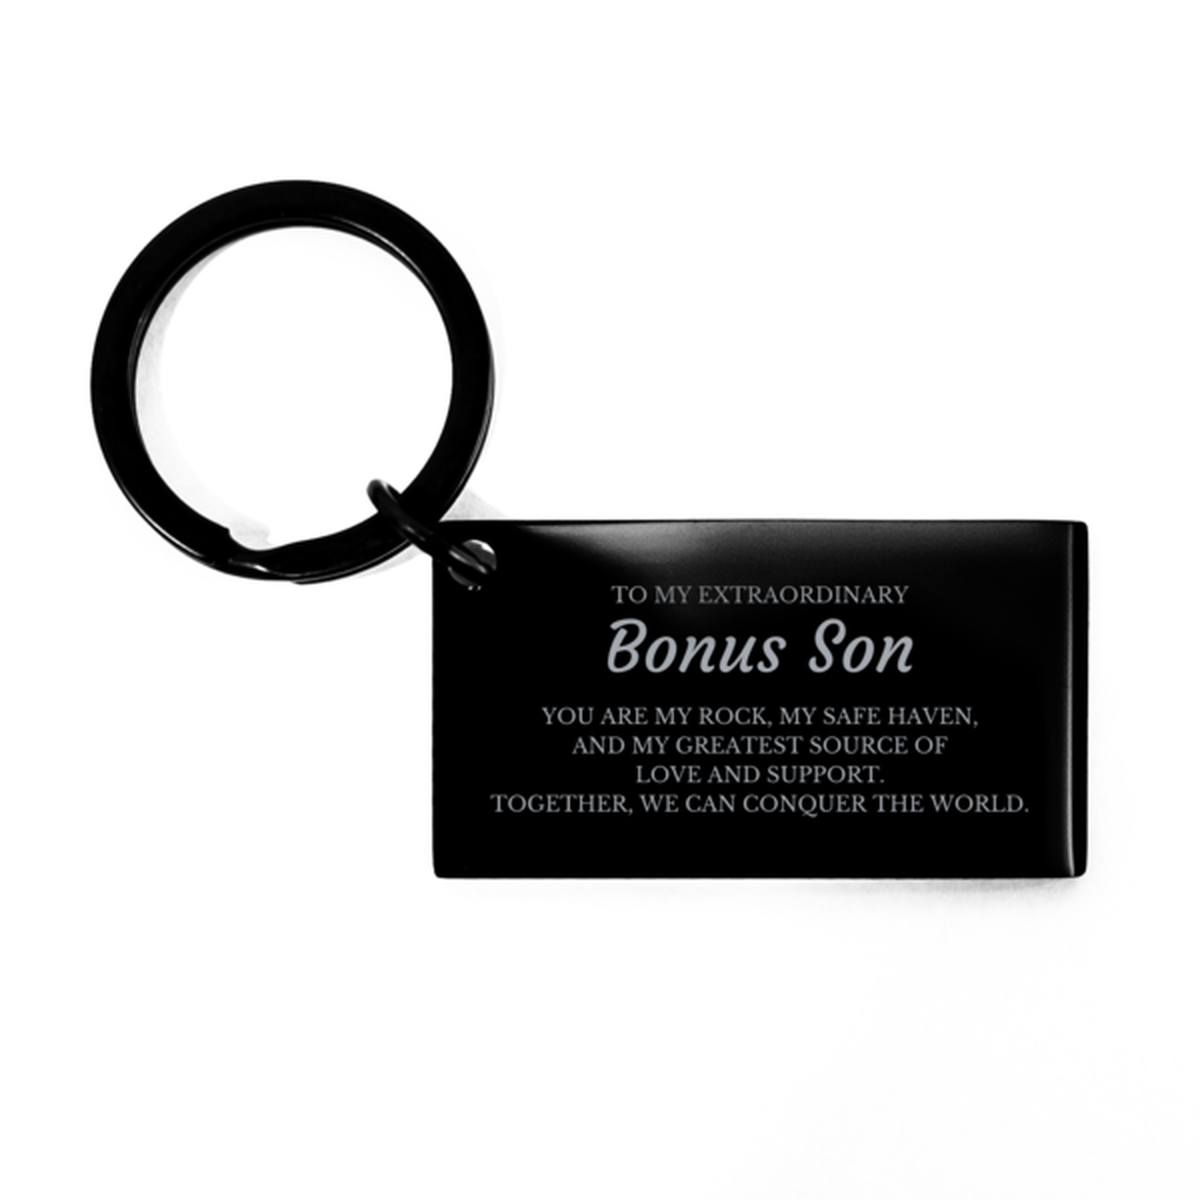 To My Extraordinary Bonus Son Gifts, Together, we can conquer the world, Birthday Keychain For Bonus Son, Christmas Gifts For Bonus Son